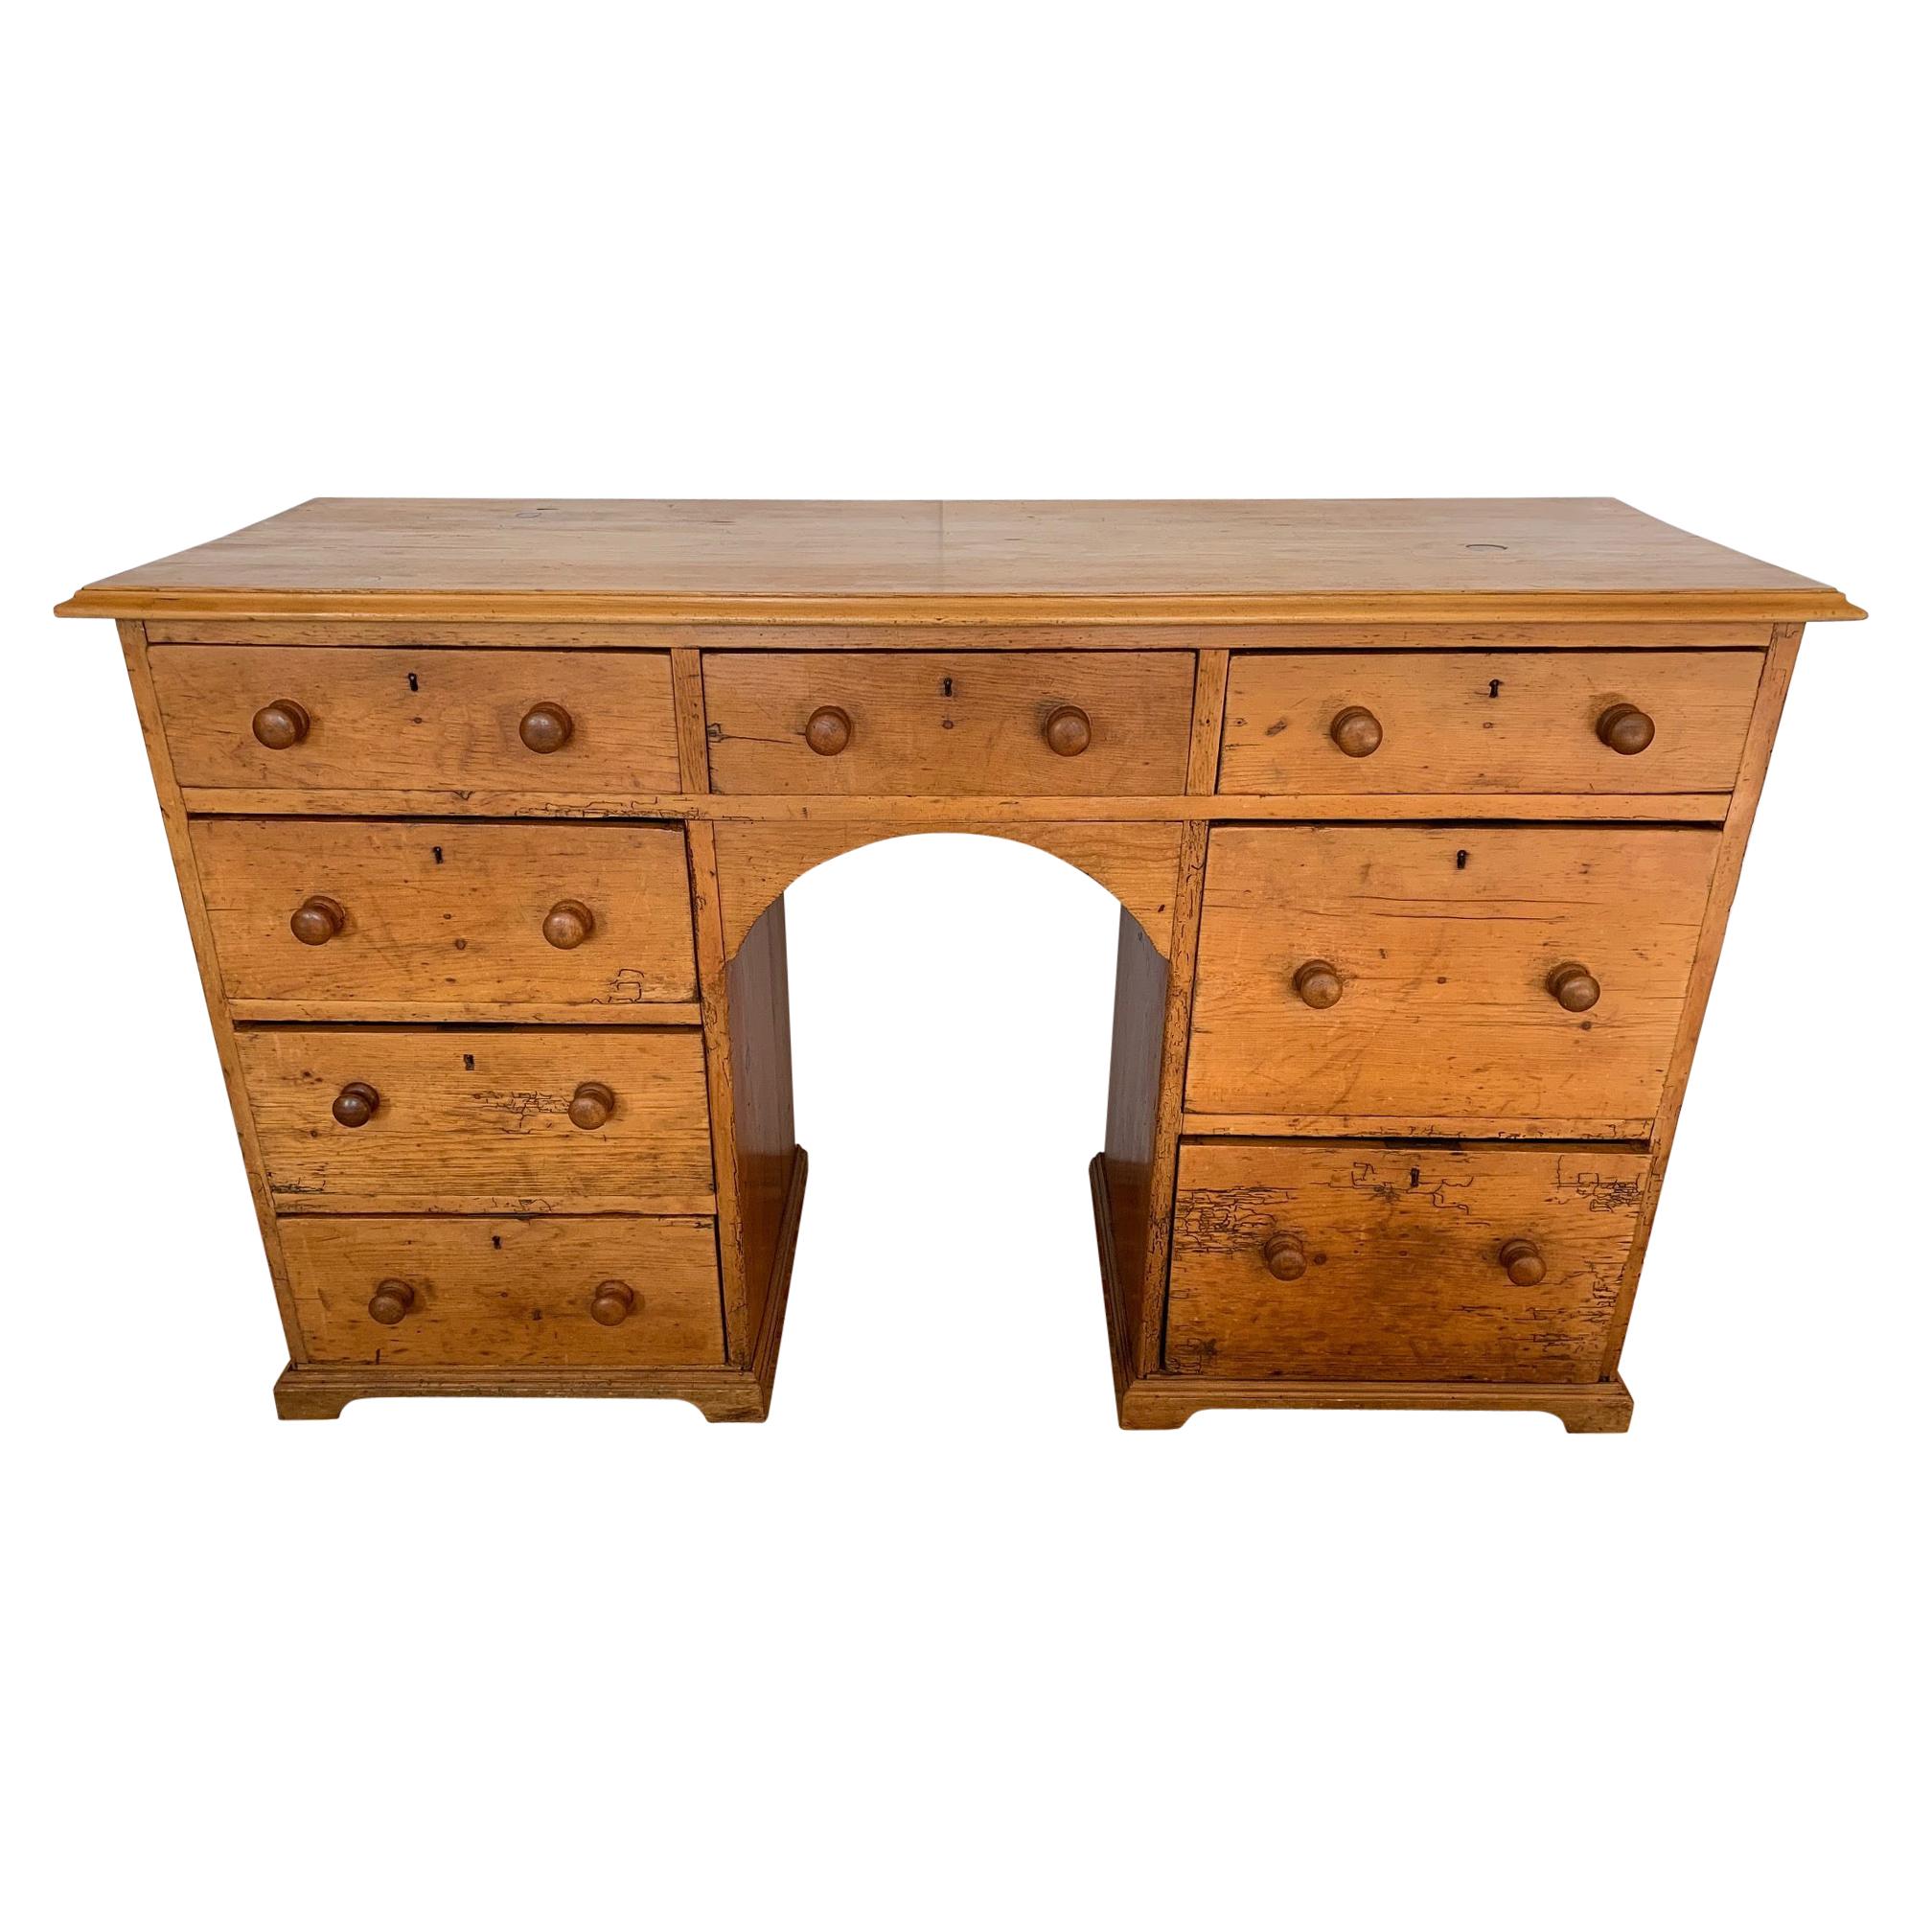 Antique Natural Pine Buffet Chest of Drawers